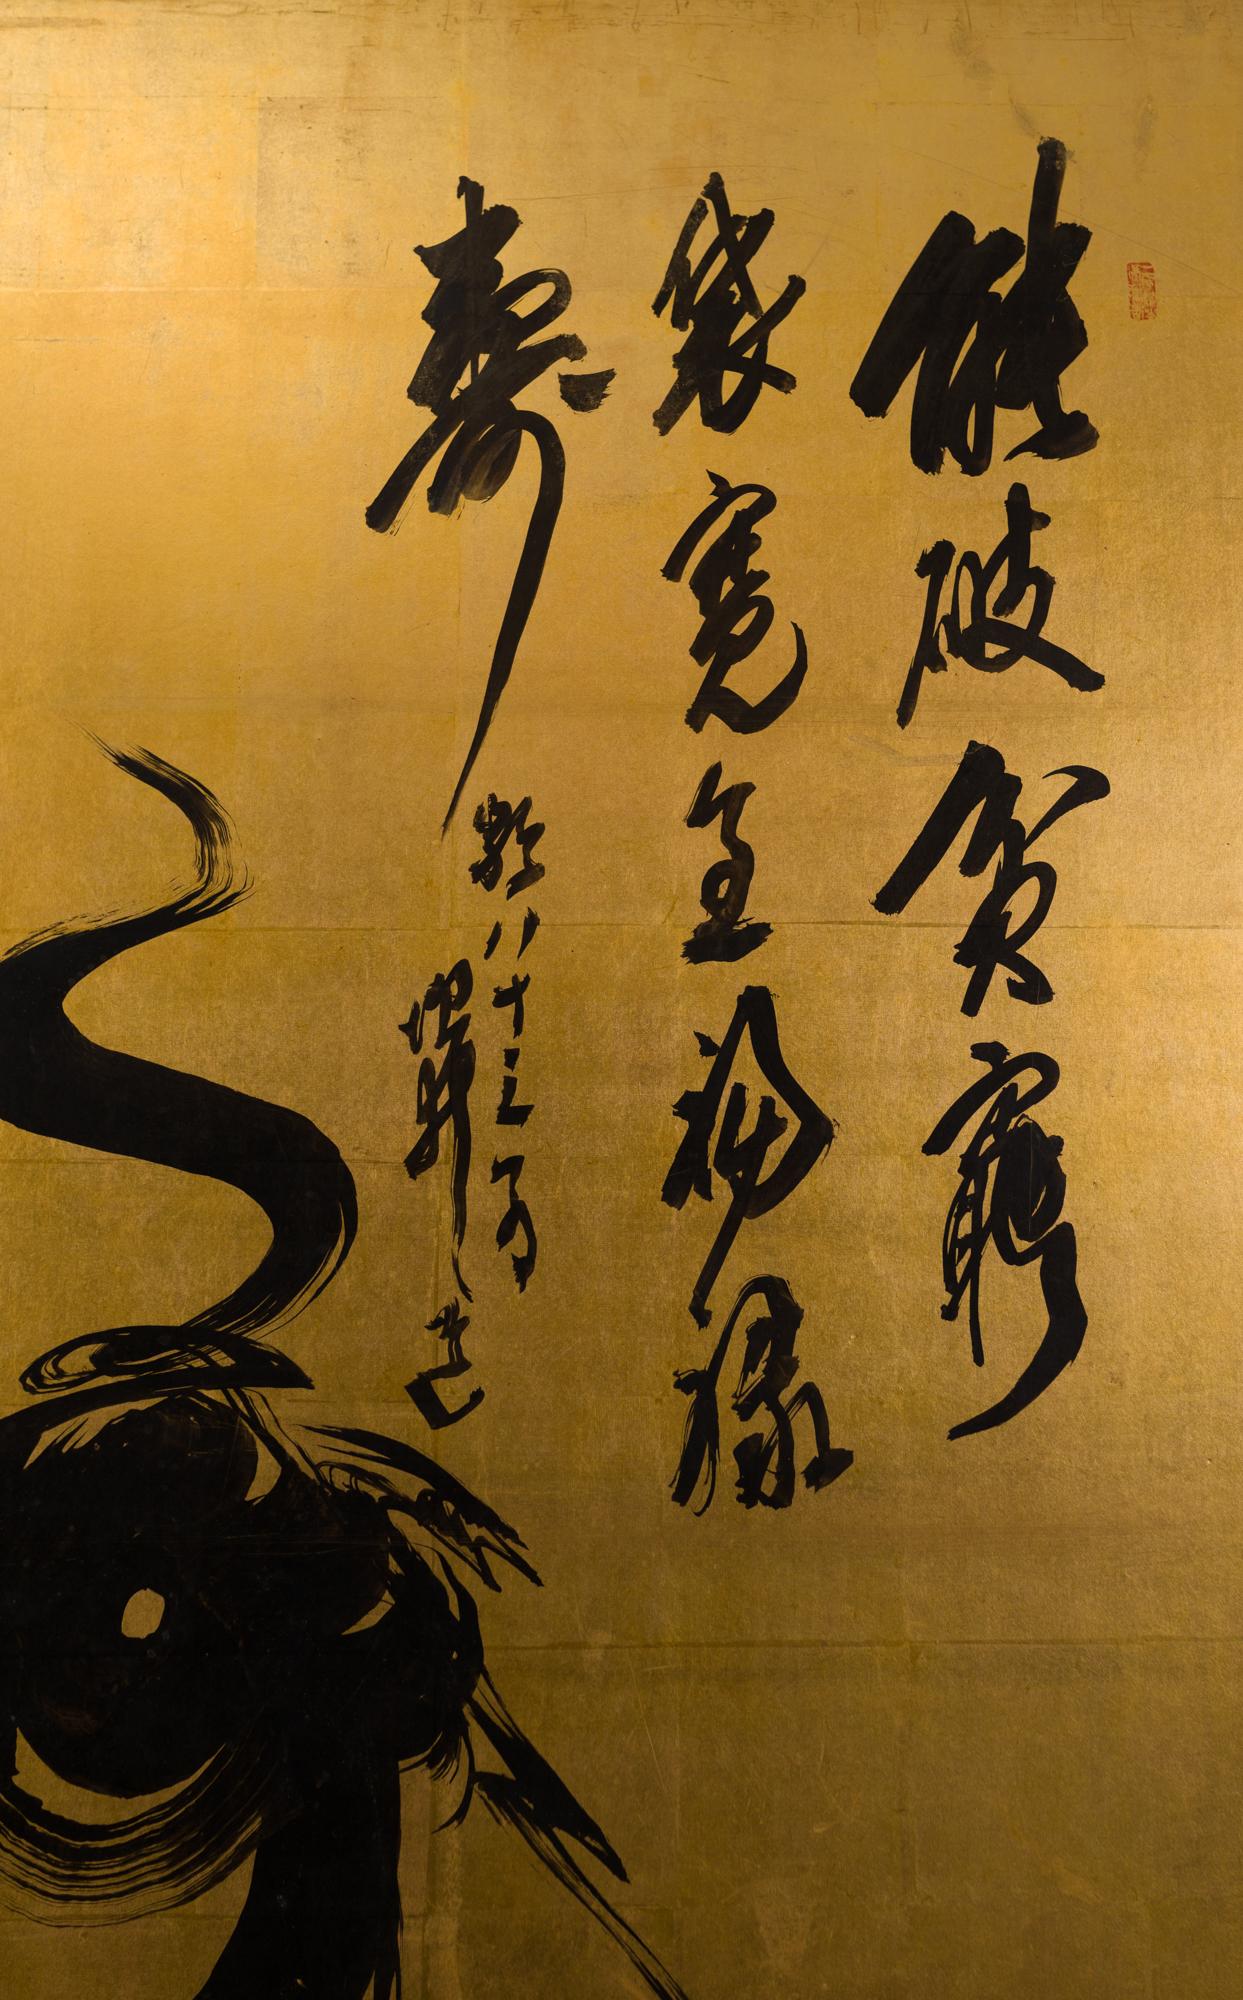 Japanese two-panel screen: Three Jewels of Buddhism. Meiji period (1868-1912) painting. The three jewels of Buddhism are the teacher, the lesson, and the Community. Loose translation of calligraphy: Liberate and listen, the bag's end is larger